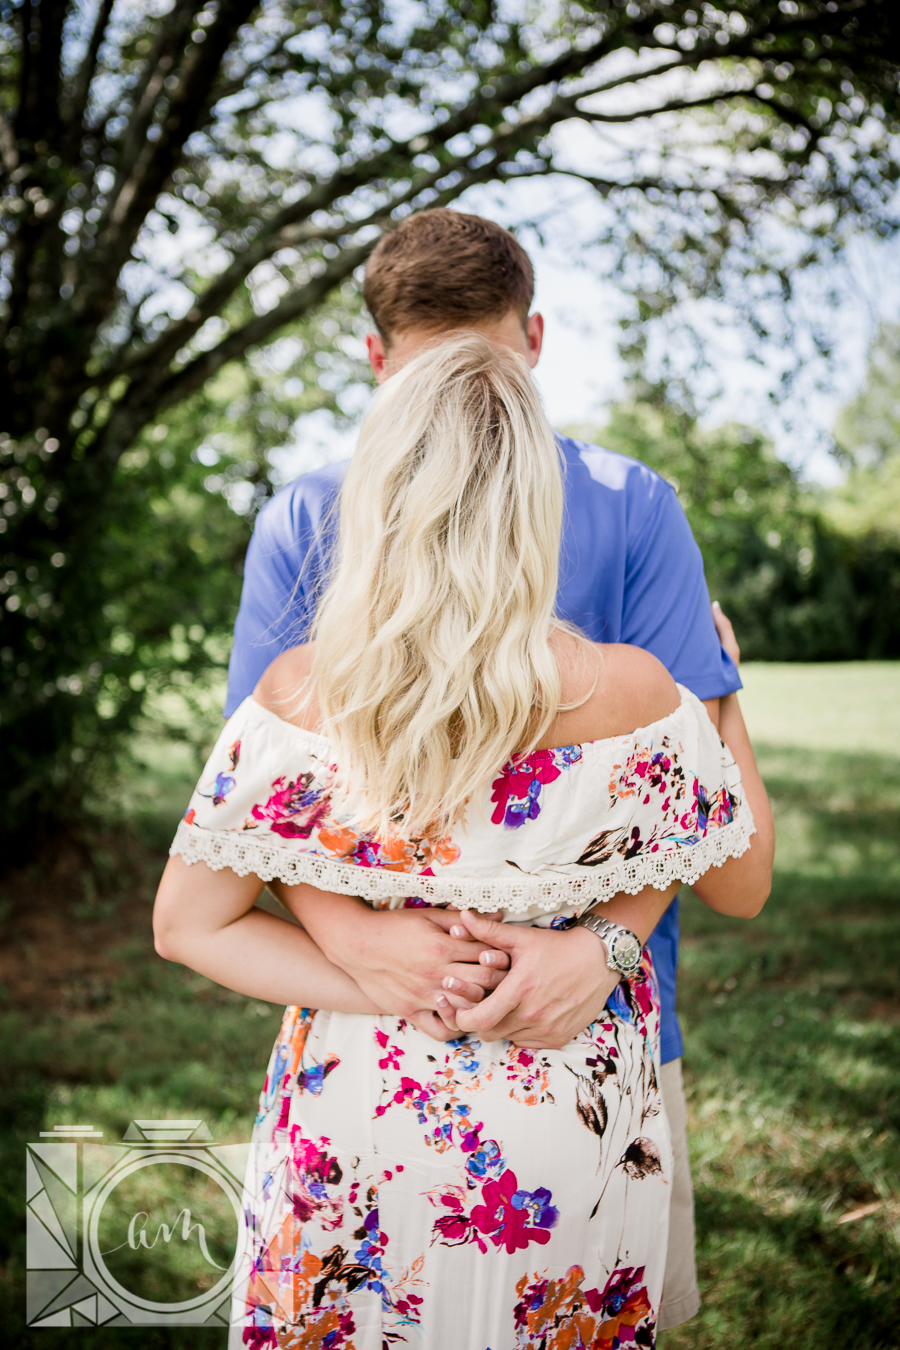 His and her hands tangled behind her back engagement photo by Knoxville Wedding Photographer, Amanda May Photos.